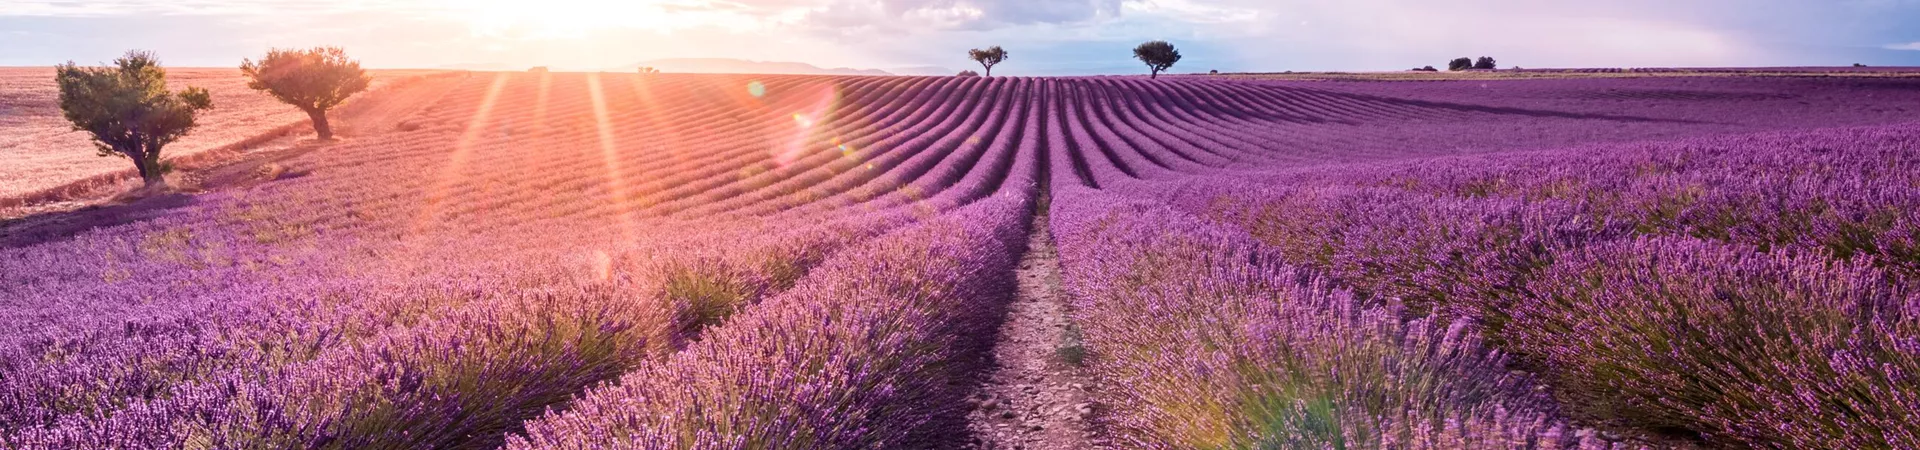 Lavender fields at dusk in the South of France